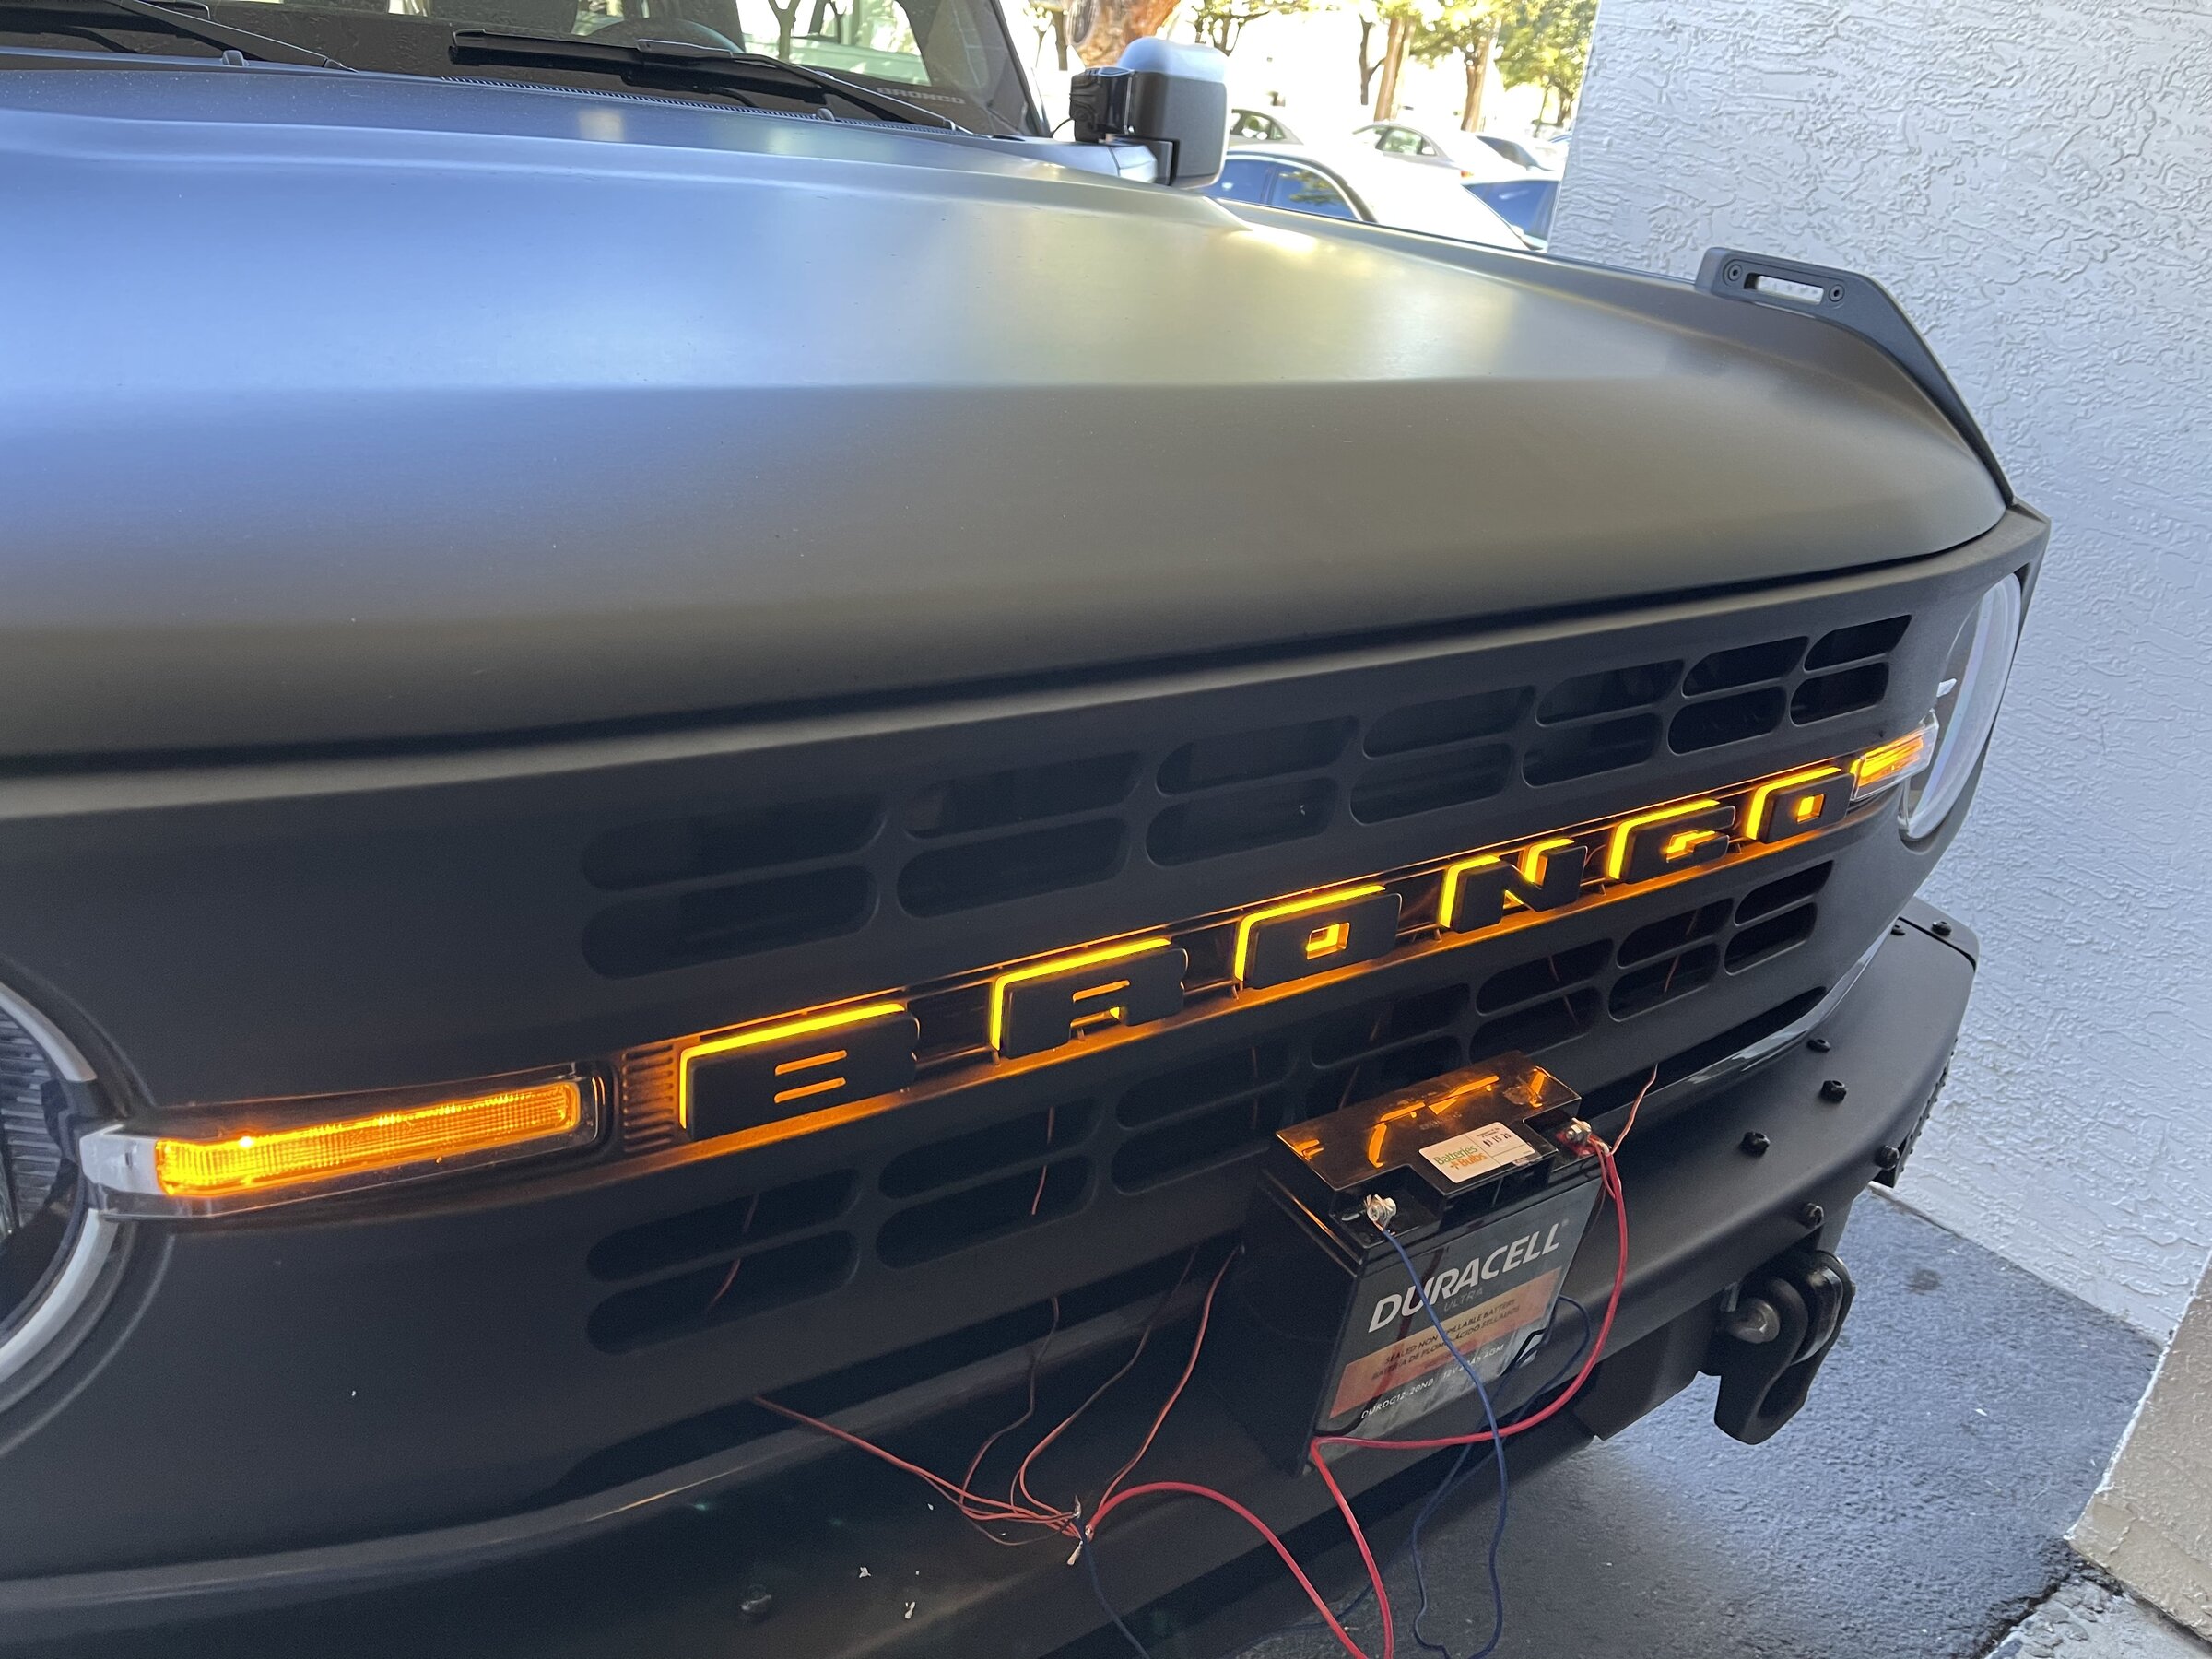 Ford Bronco NOW AVILABLE: : ORACLE Lighting: UNIVERSAL ILLUMINATED LED LETTERS B8CCC5E9-2E47-4630-A5EB-089D2AB2F379